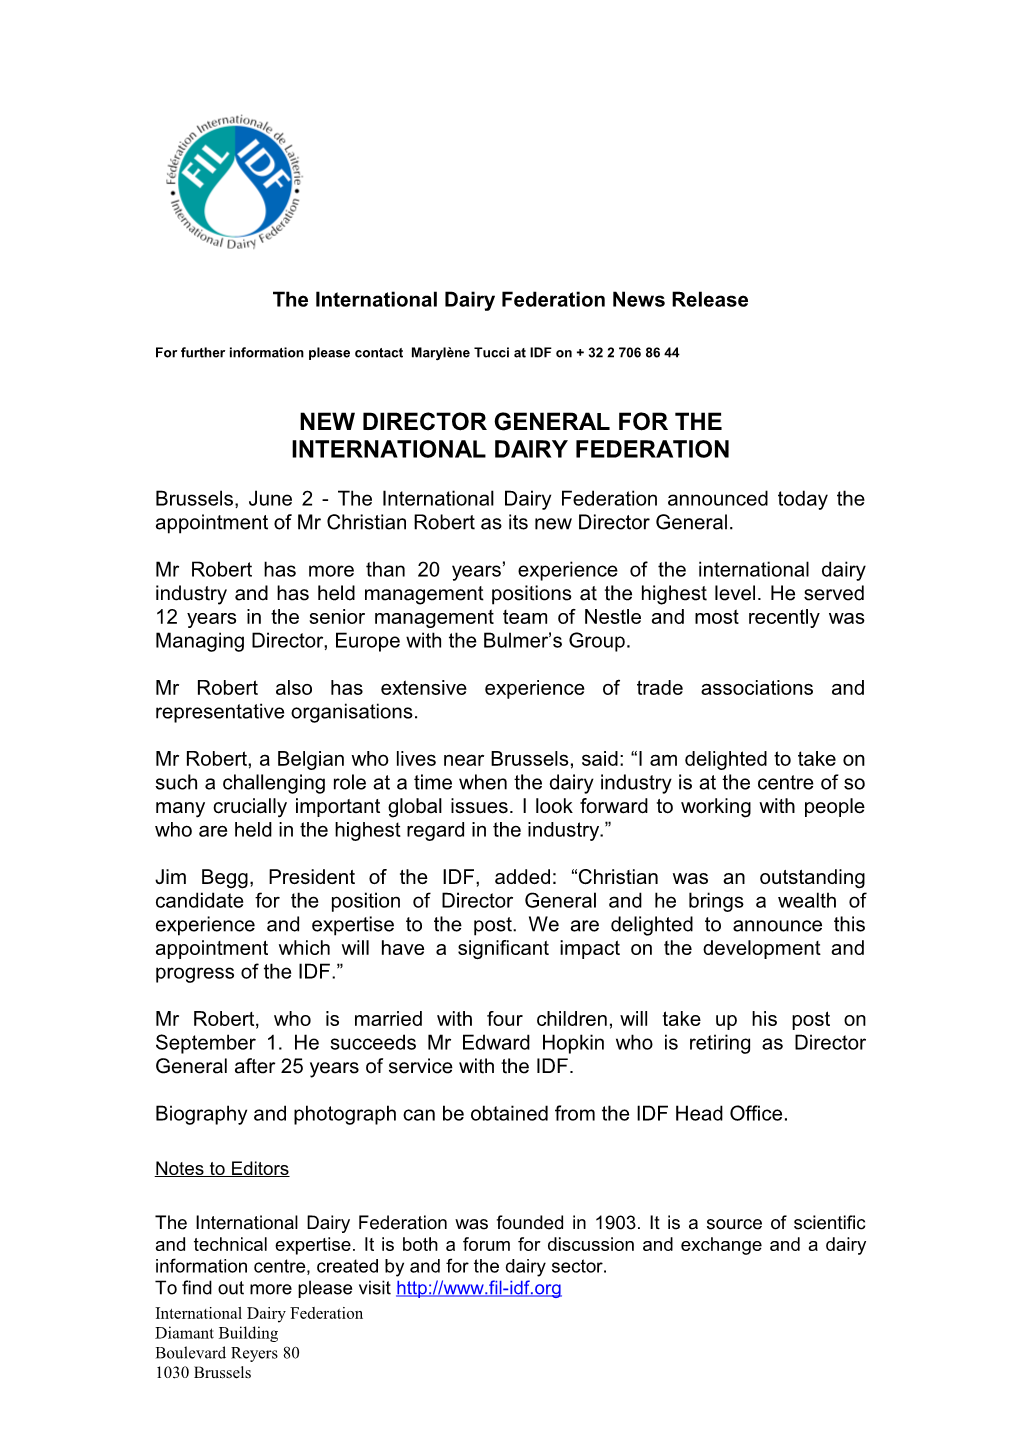 The International Dairy Federation News Release s1